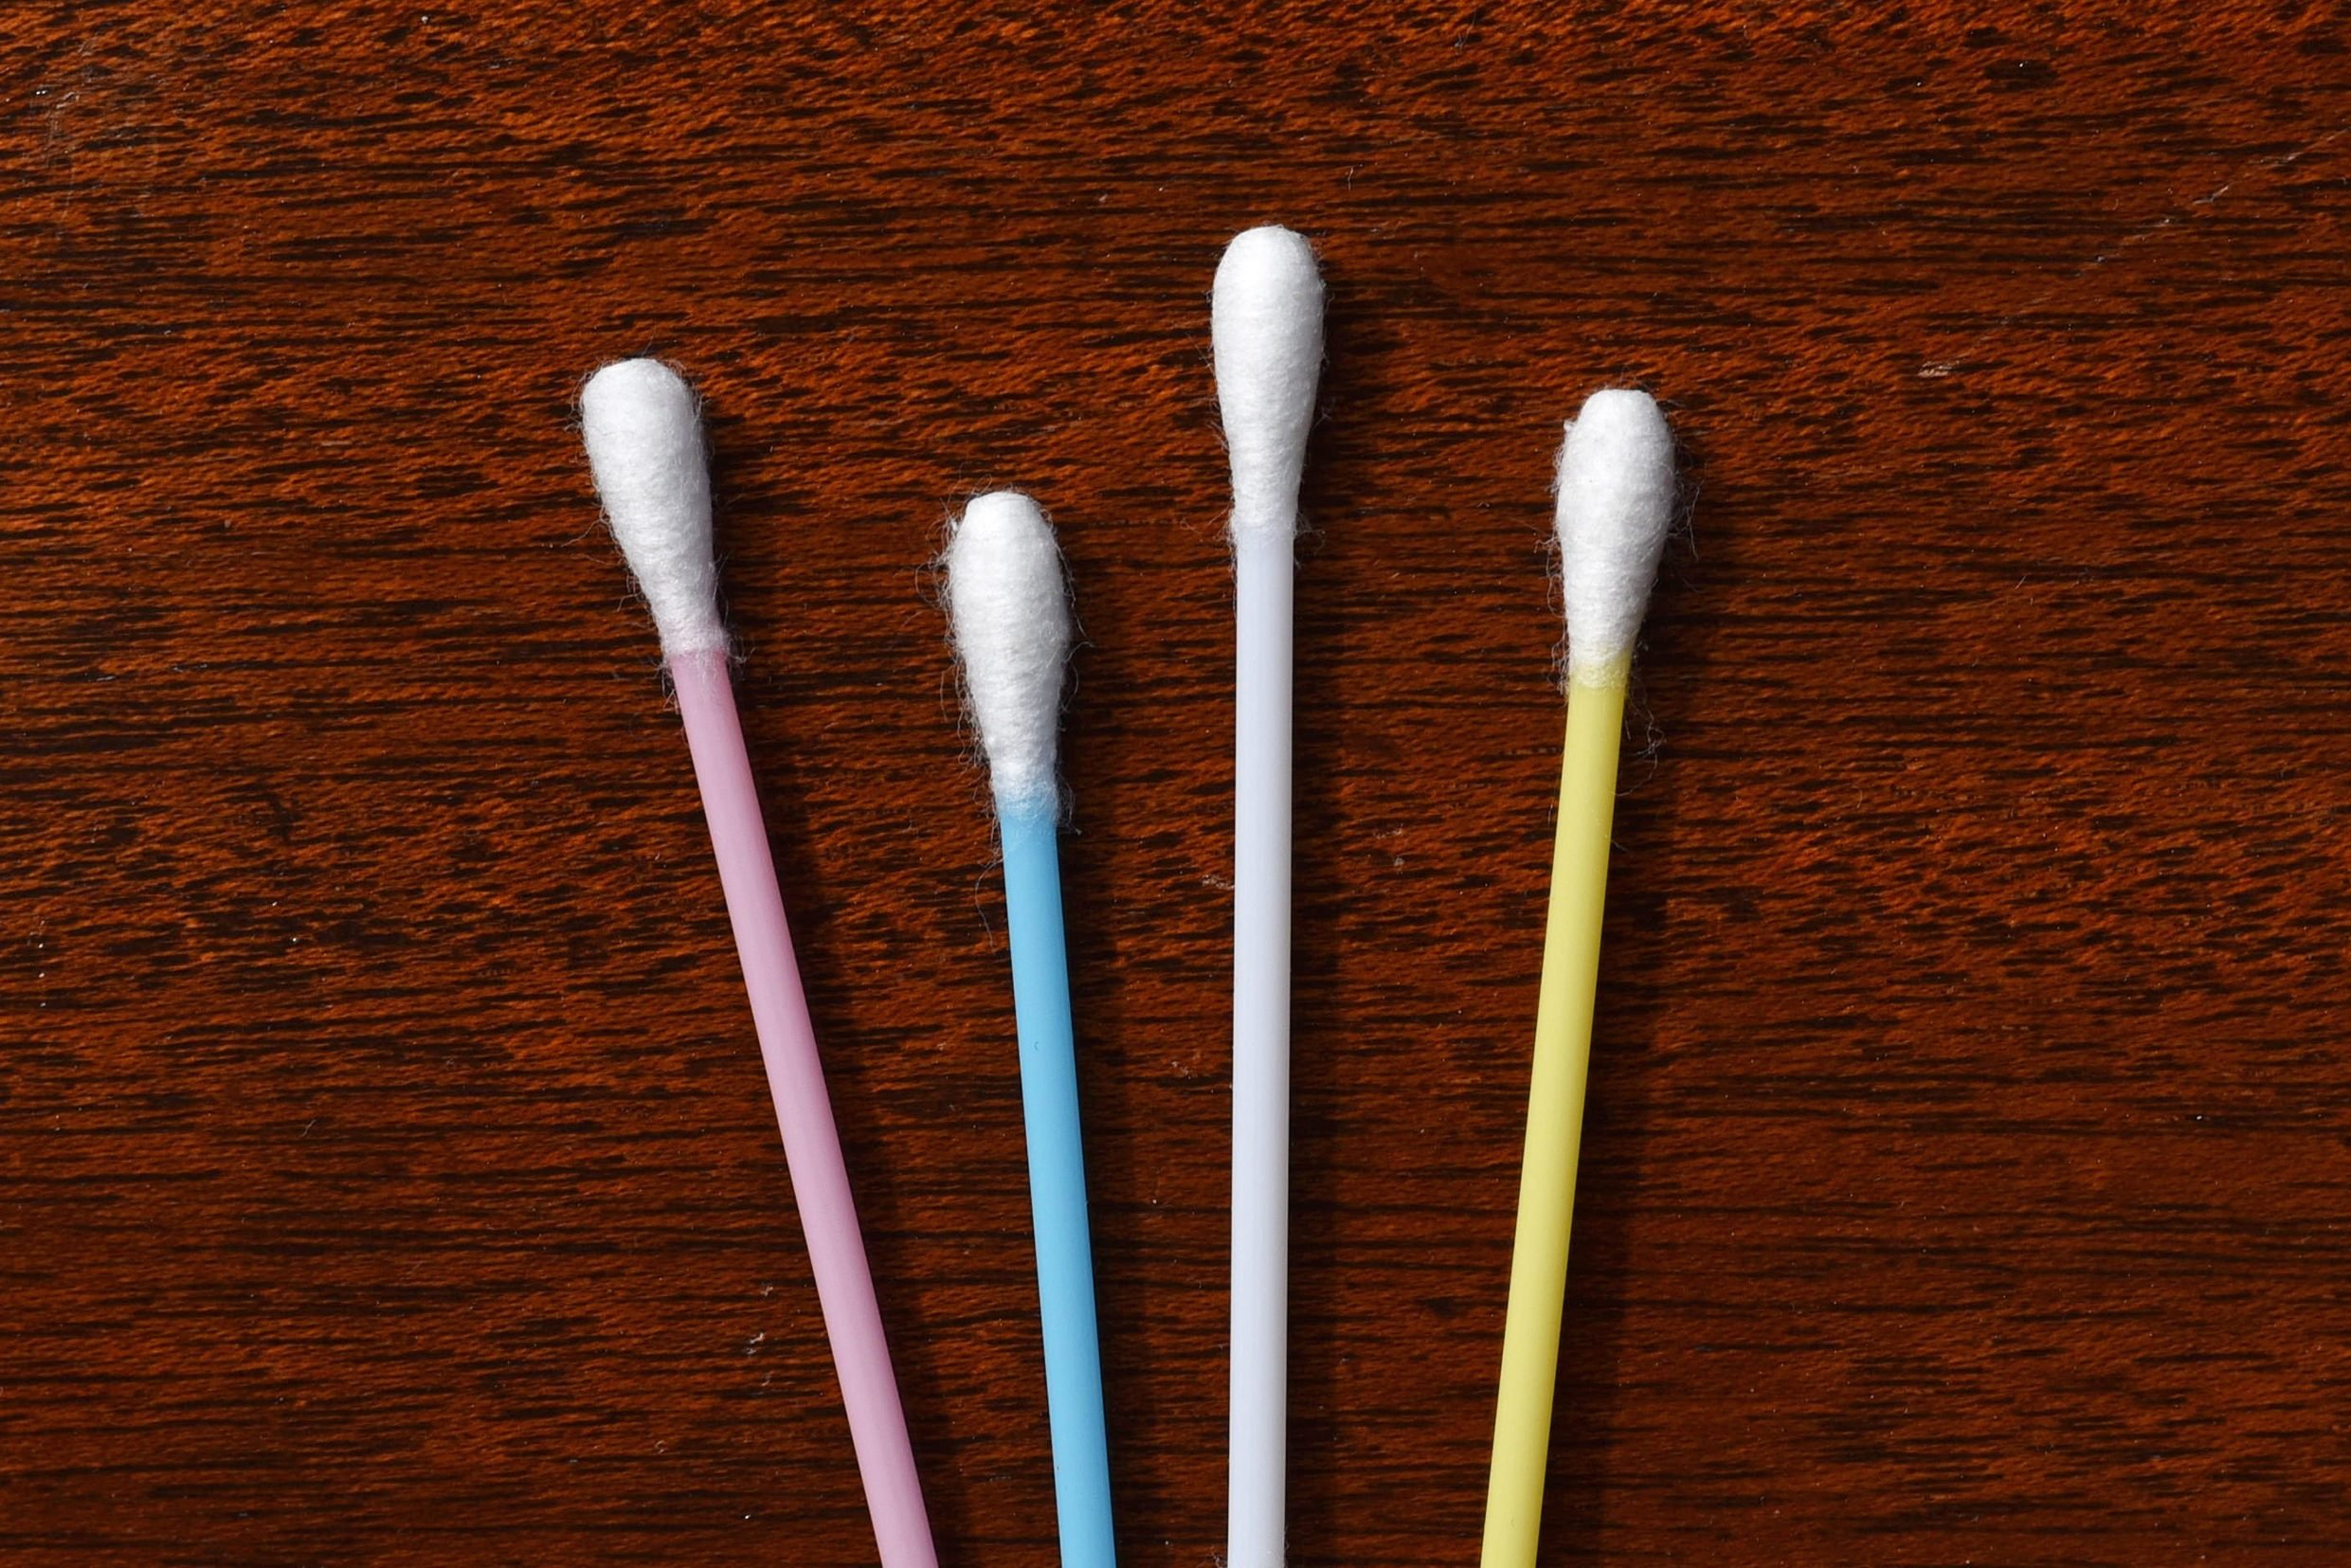 Brilliant Uses Q-Tips Come in Handy |